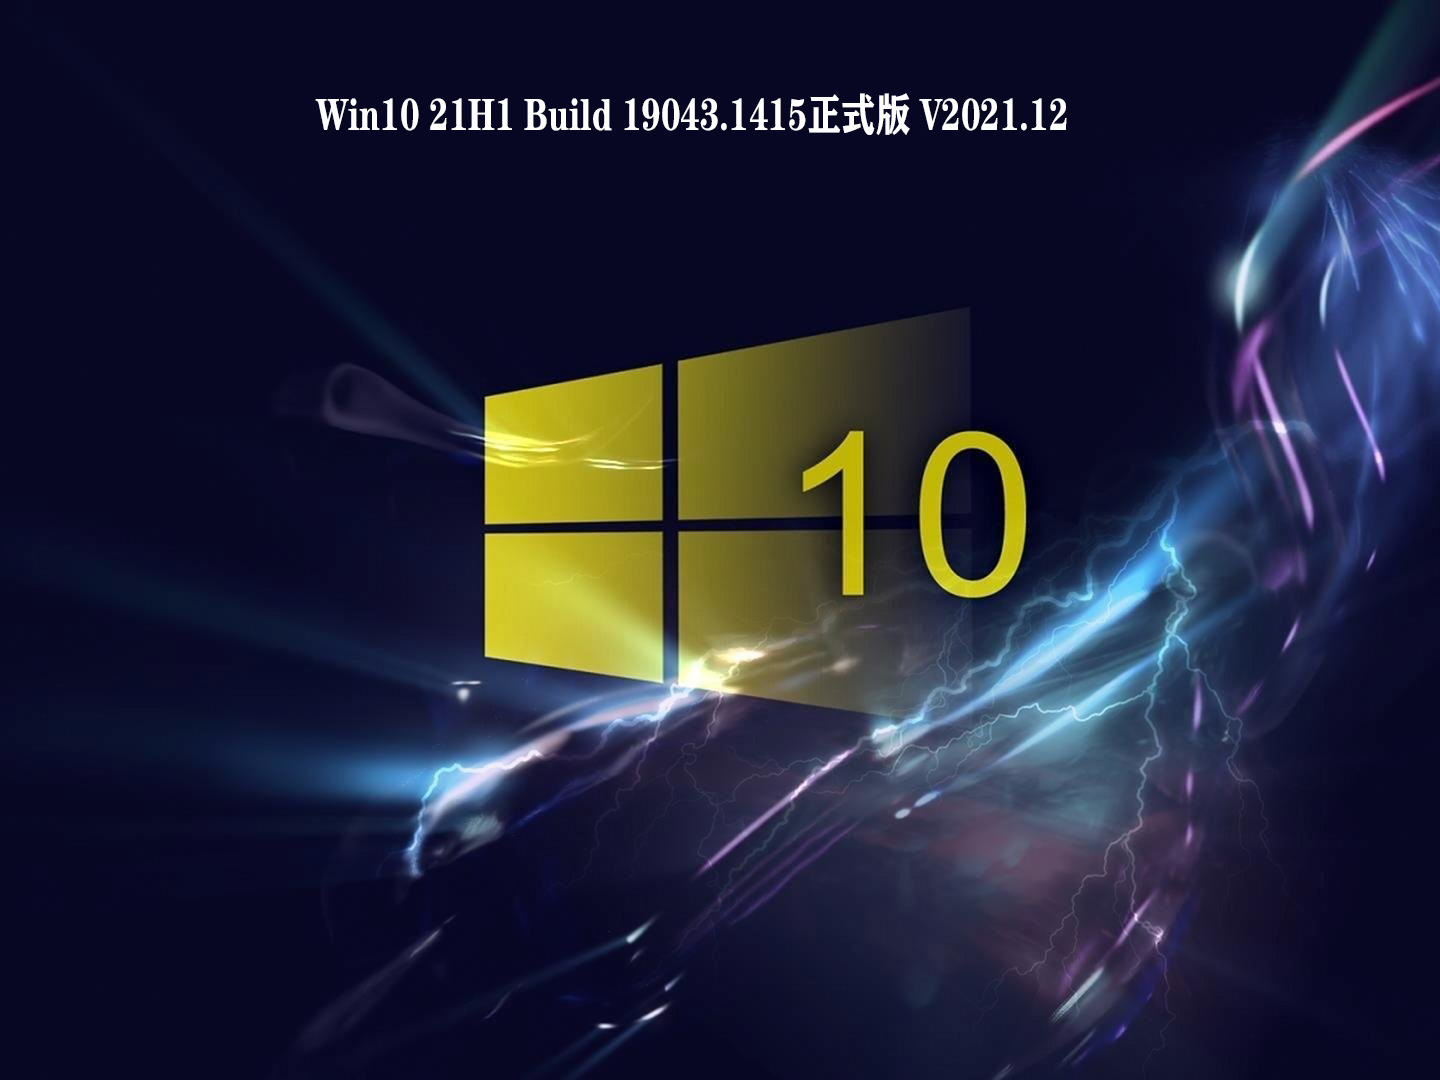 Win10 21H1 Build 19043.1415正式版下载_Win10 21H1 Build 19043.1415官方ISO镜像下载